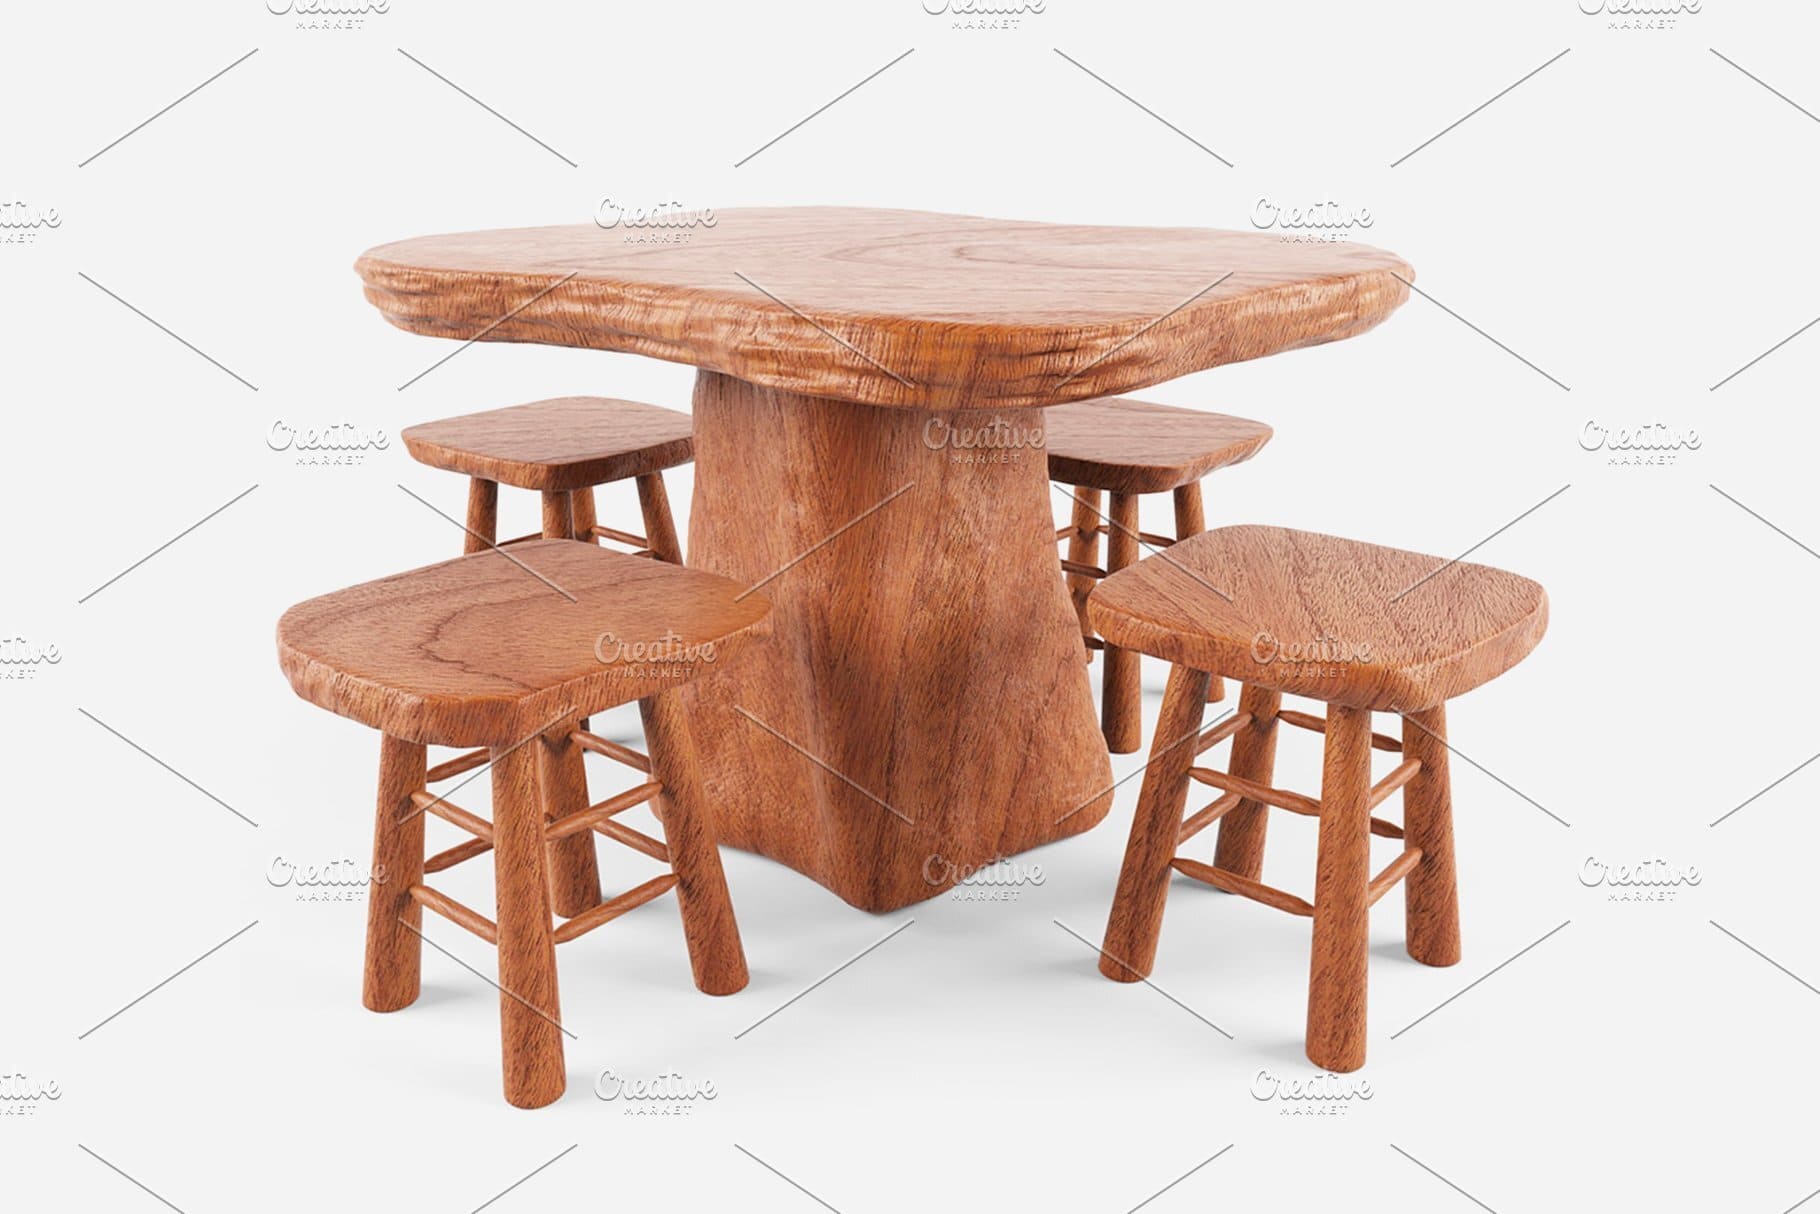 Rustic wood table and chairs, picture 1820x1214.